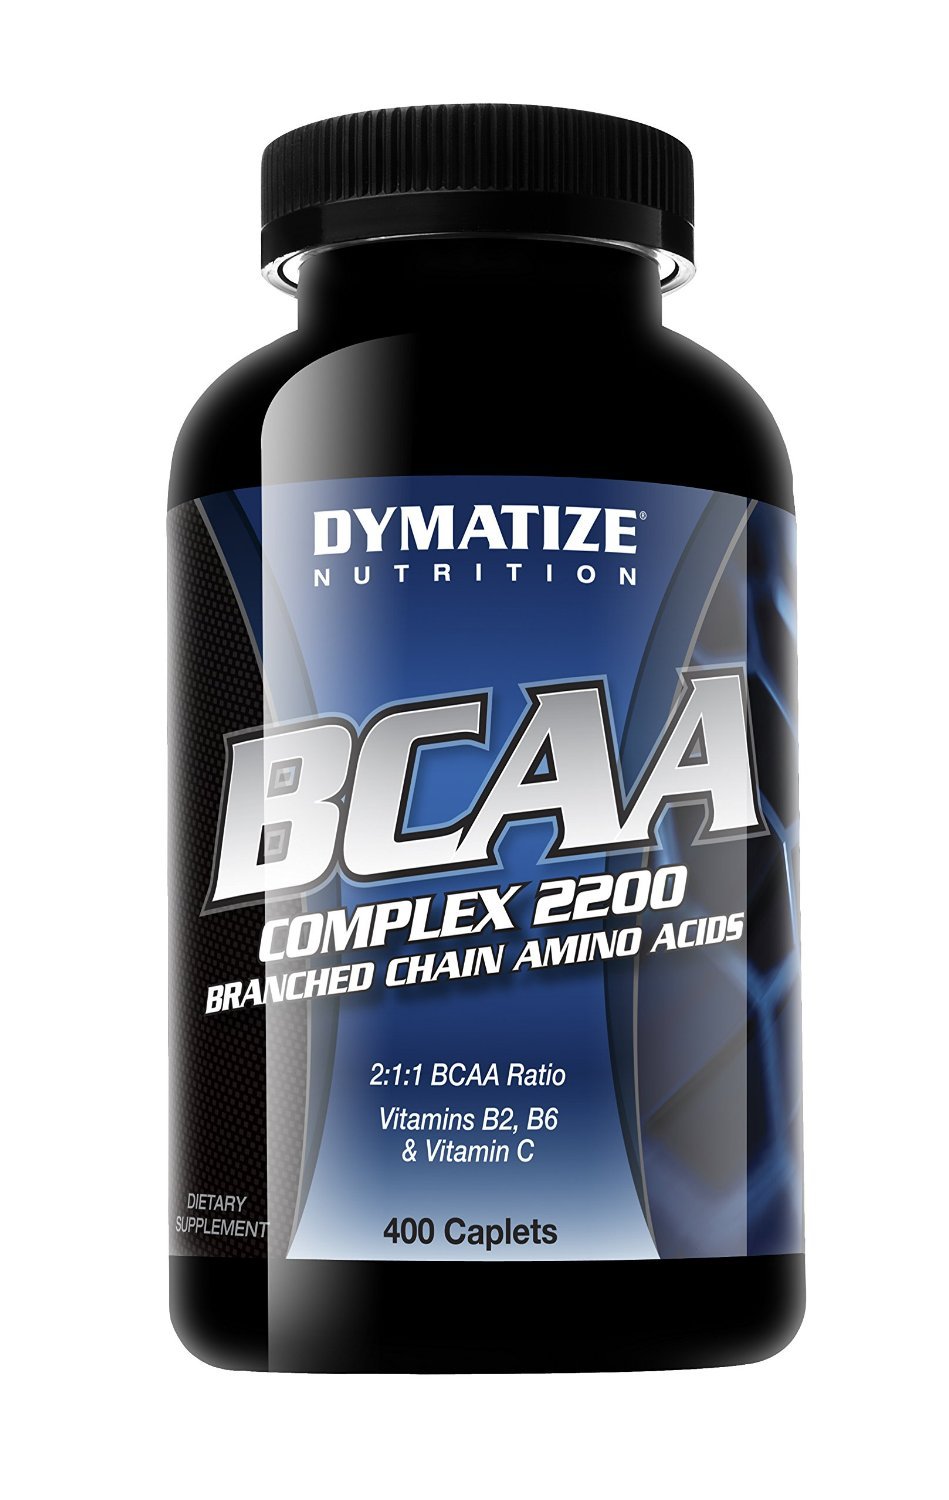 BCAA Complex 2200, 400 pcs, Dymatize Nutrition. BCAA. Weight Loss recovery Anti-catabolic properties Lean muscle mass 